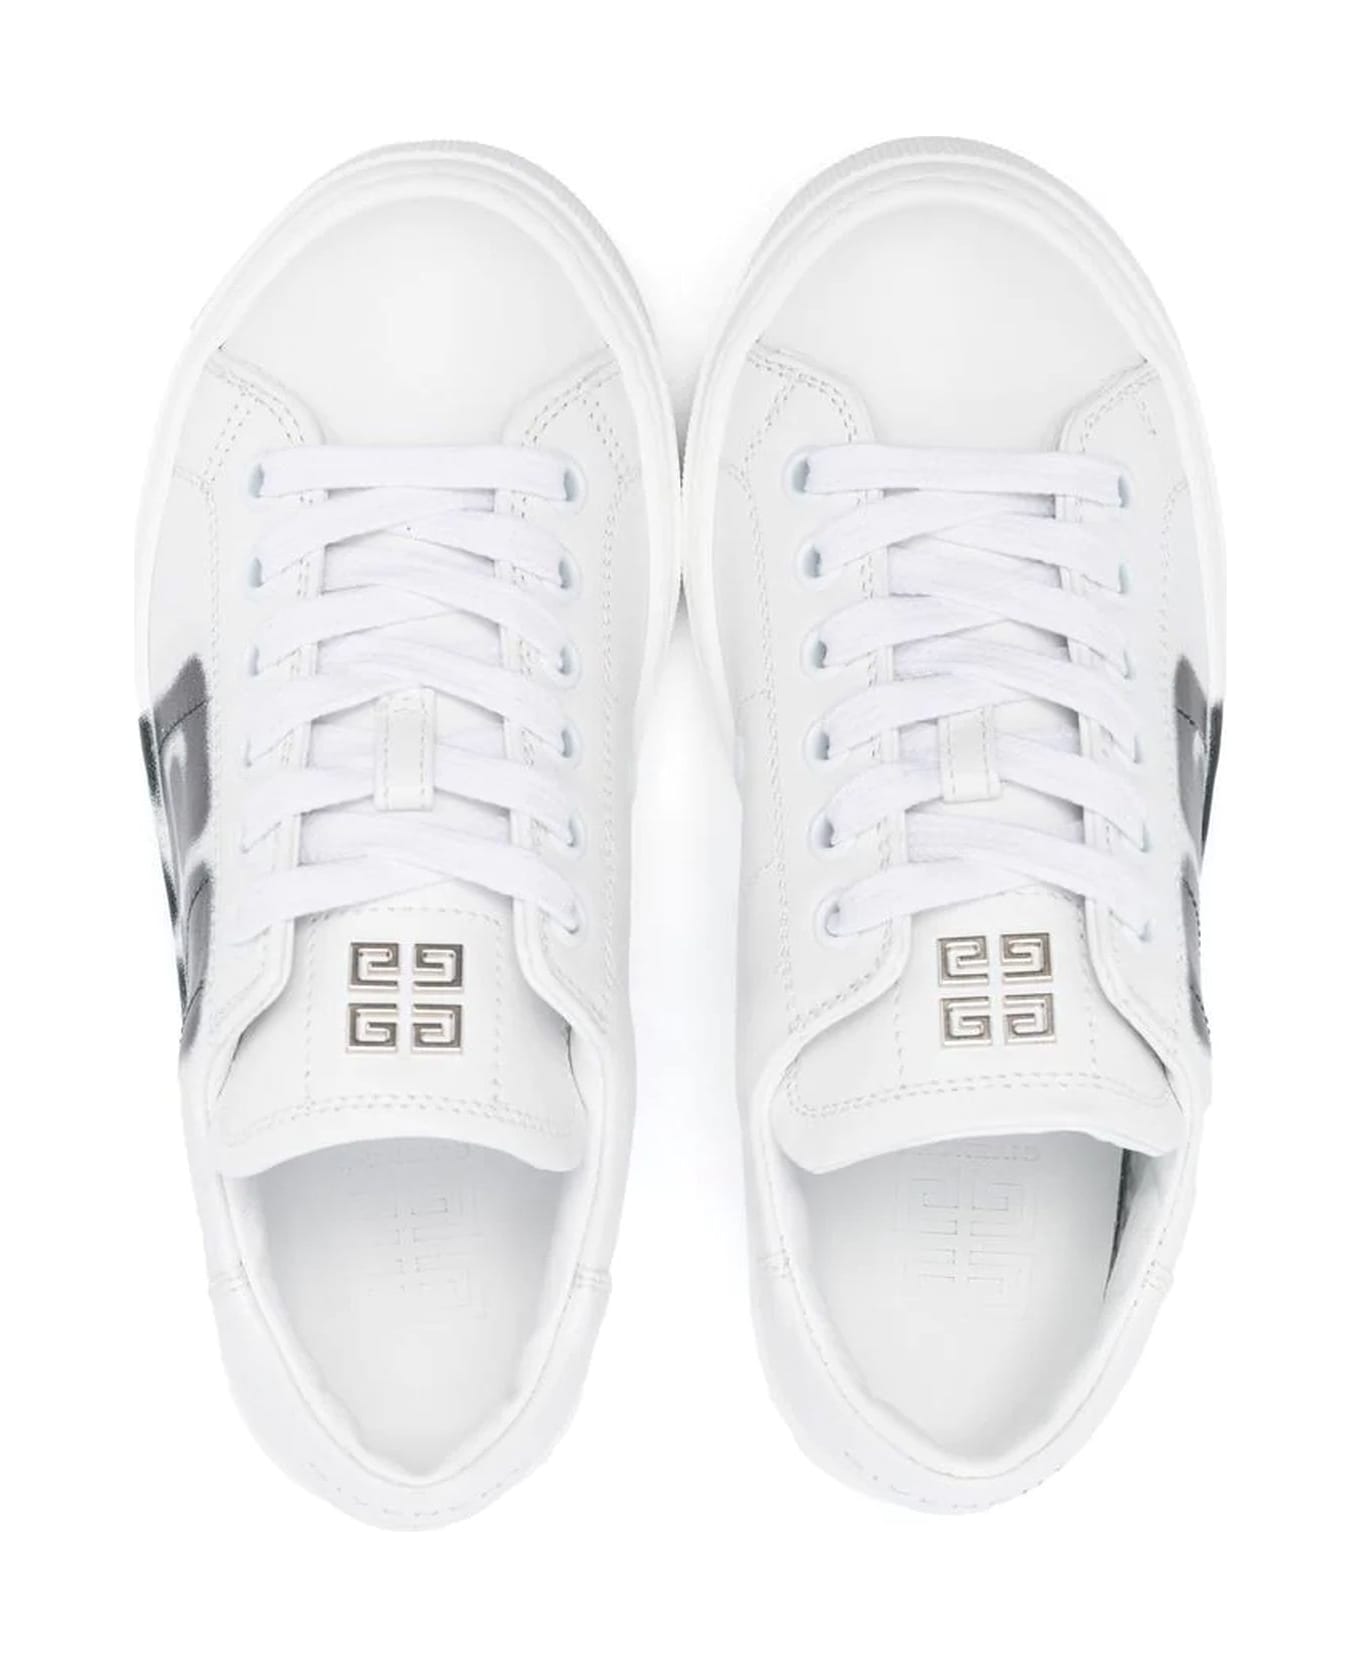 Givenchy White Leather Sneakers - Bianco